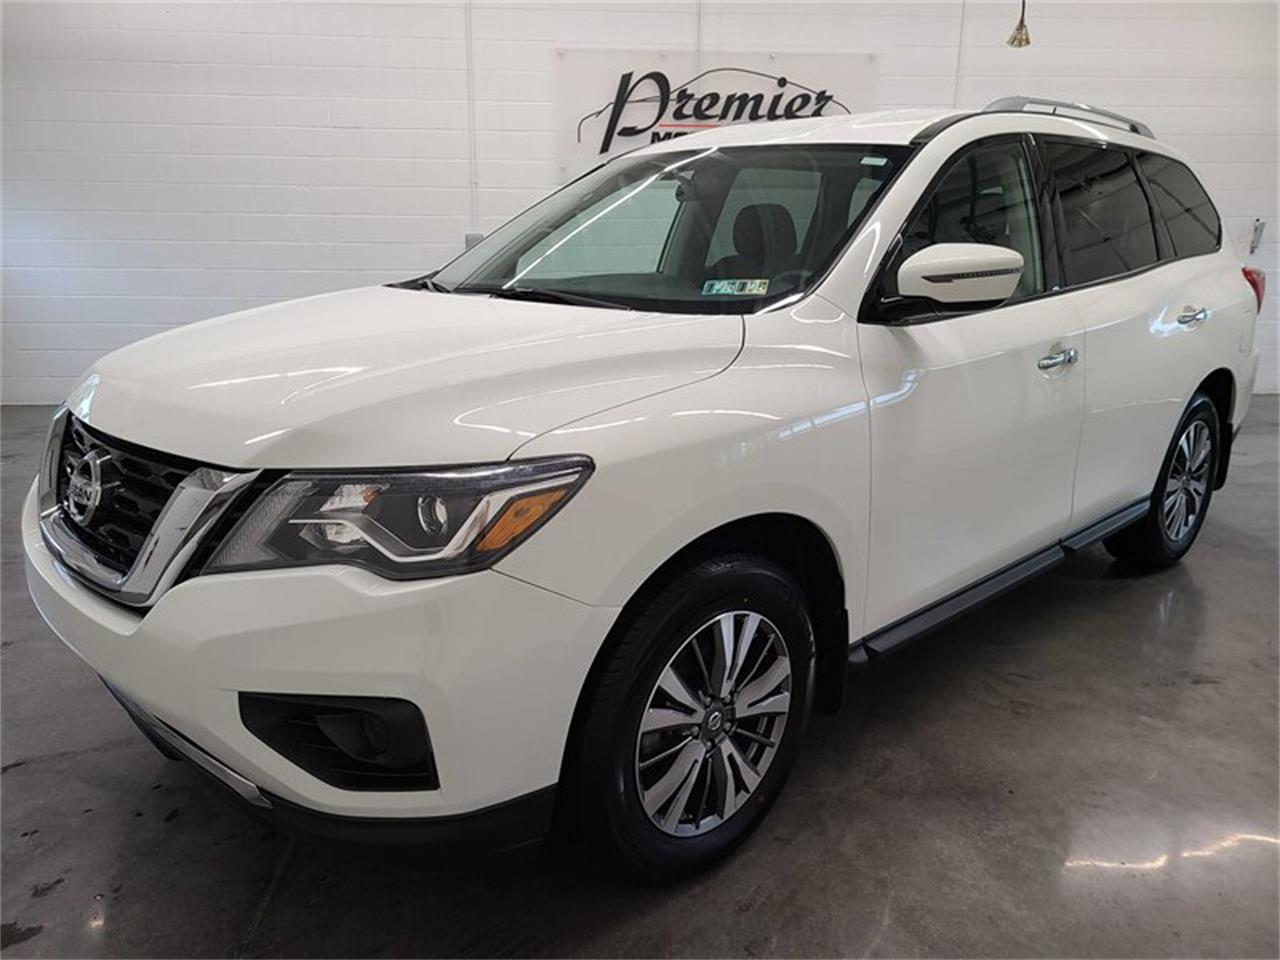 For Sale: 2018 Nissan Pathfinder in Spring City, Pennsylvania for sale in Spring City, PA